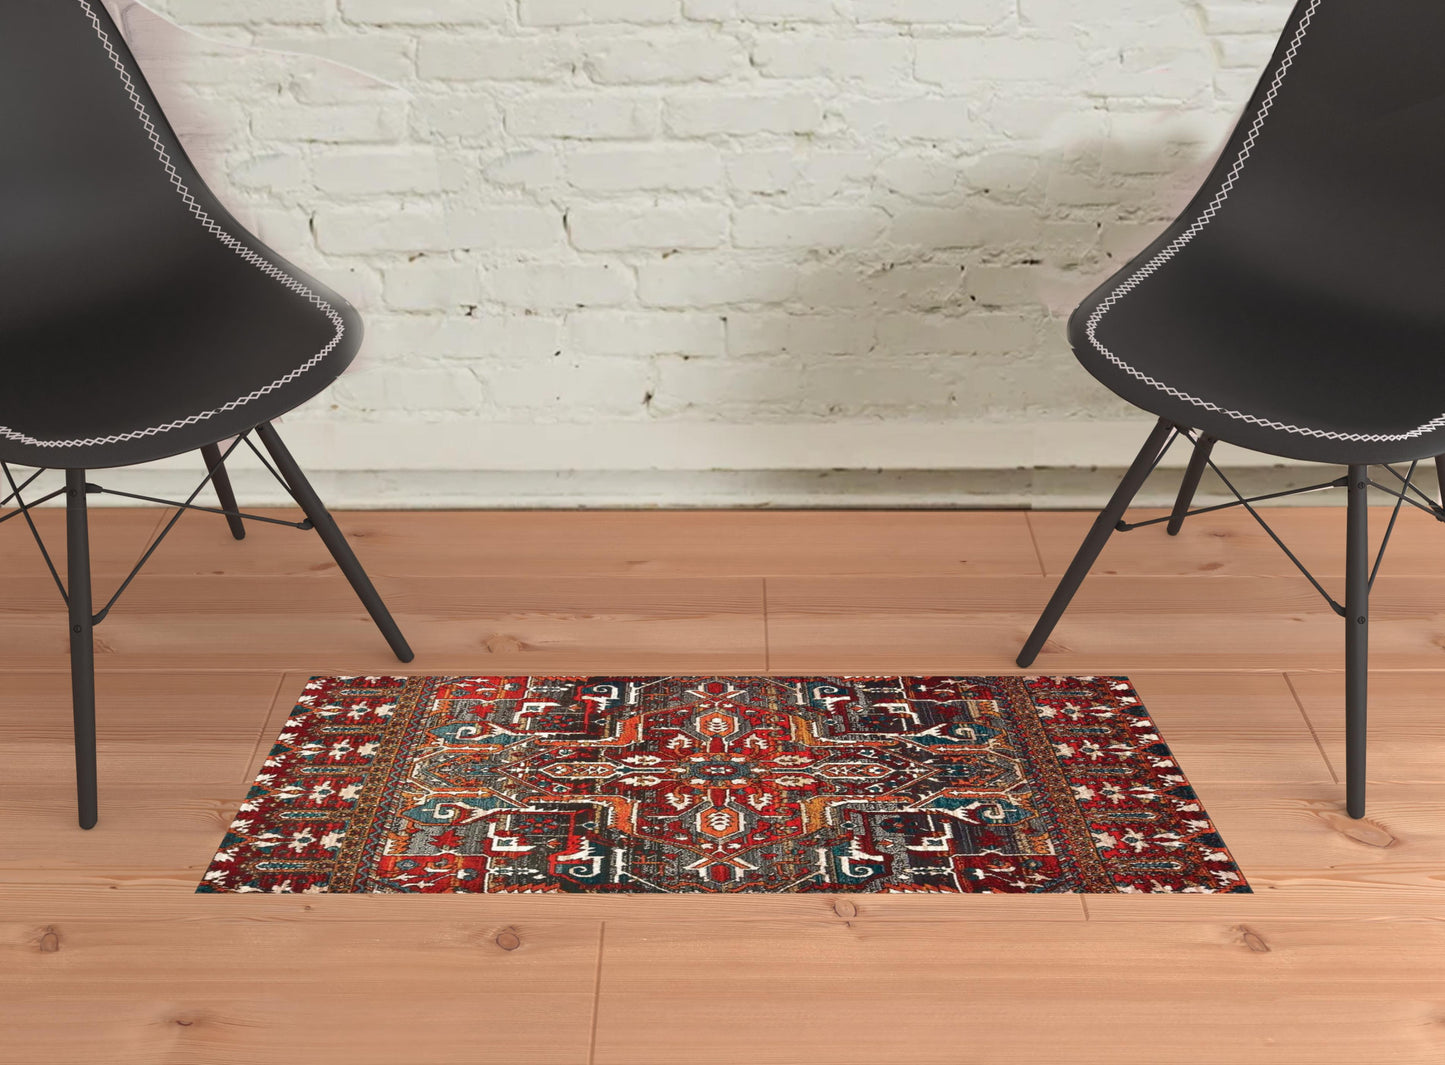 2' X 3' Red Orange Blue And Grey Southwestern Power Loom Stain Resistant Area Rug